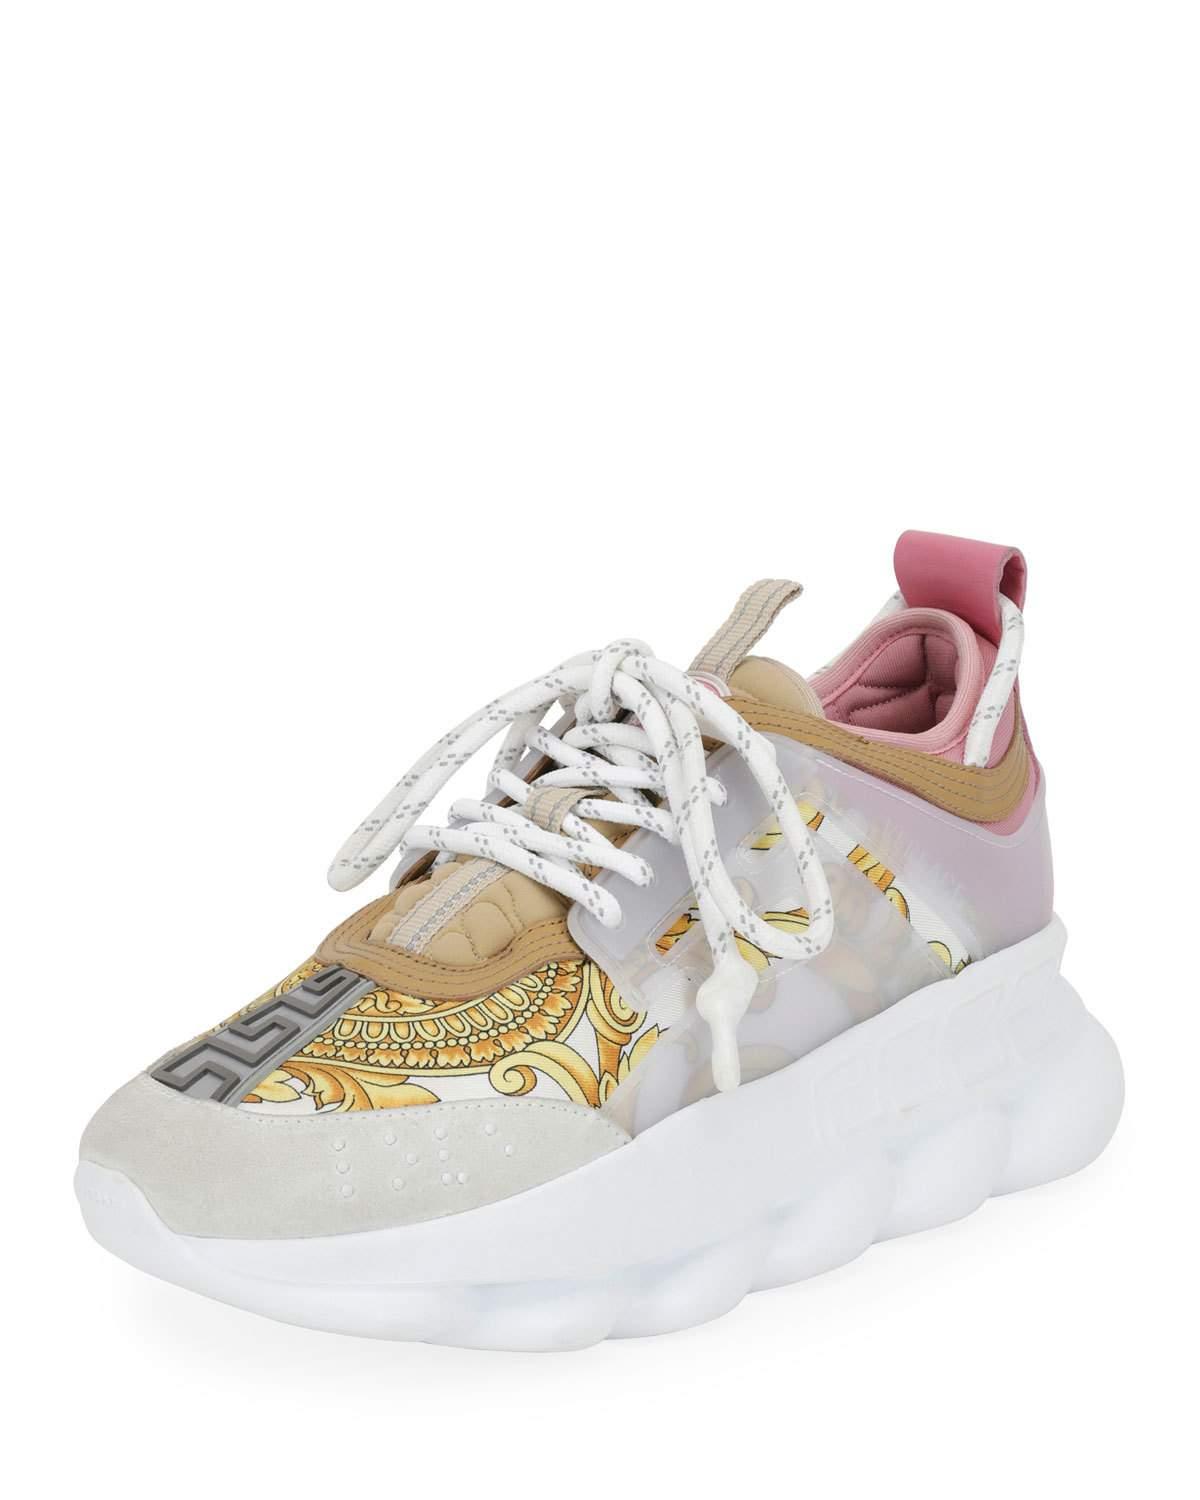 versace chain reaction sneakers pink